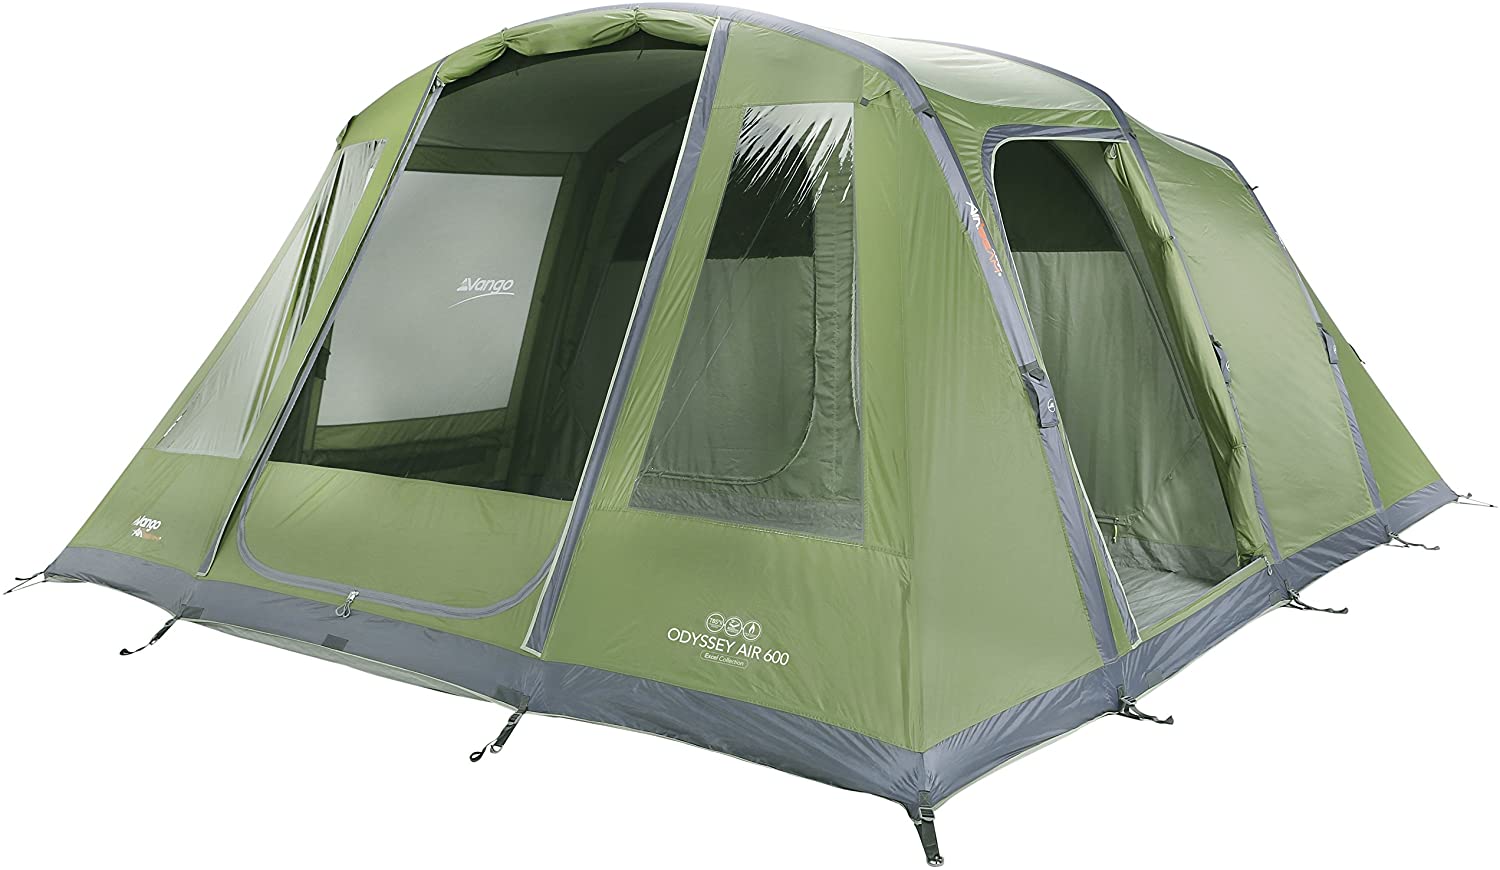 Vango Odyssey Air 600 family inflatable tent